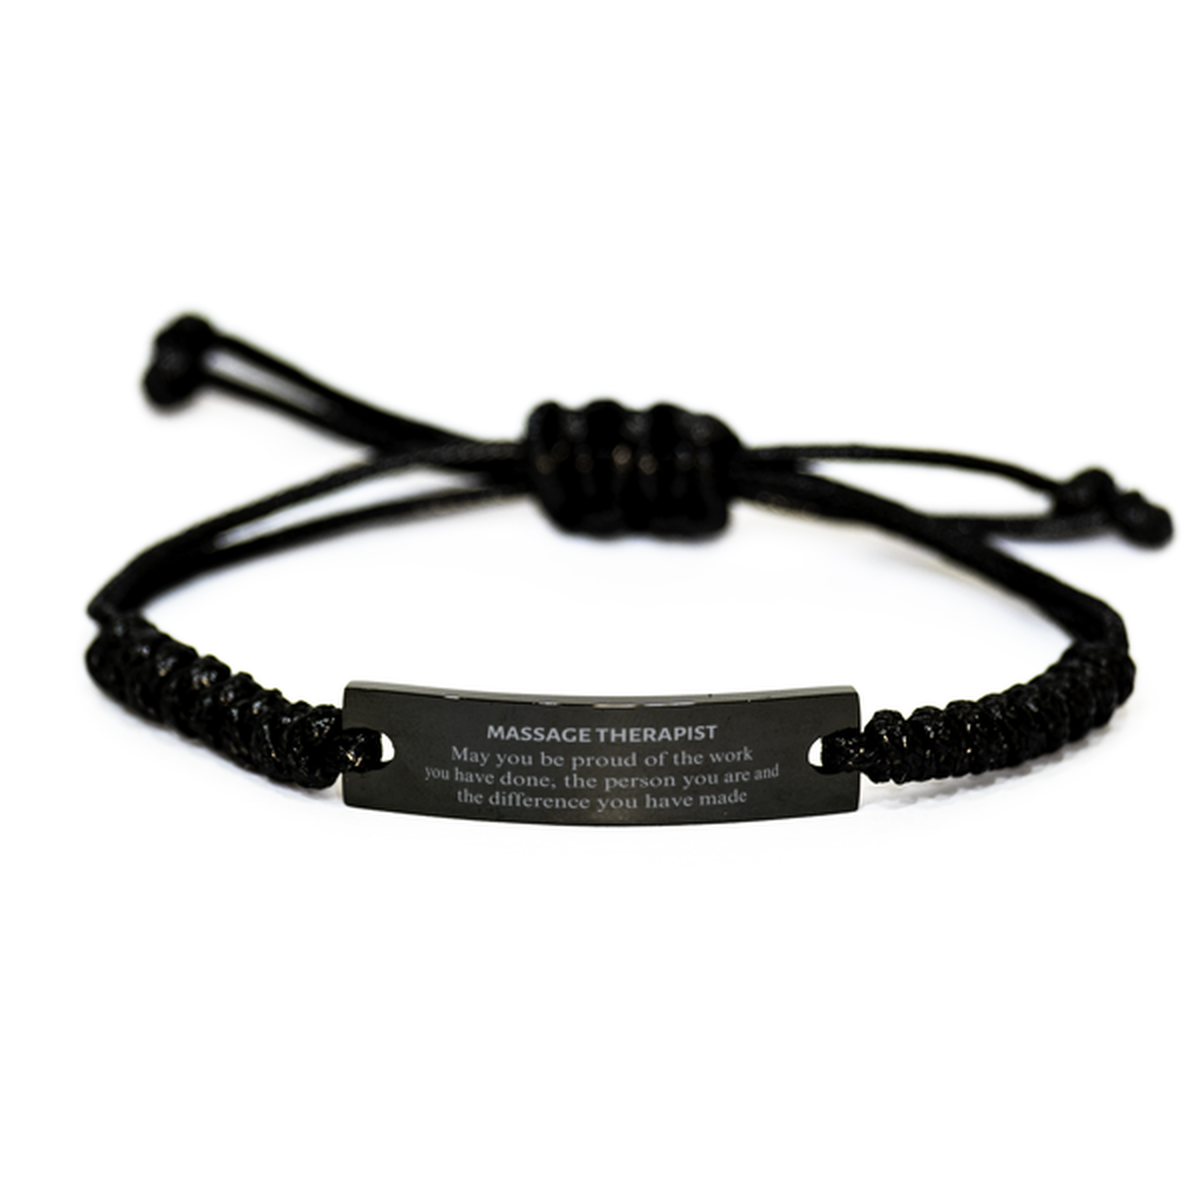 Massage Therapist May you be proud of the work you have done, Retirement Massage Therapist Black Rope Bracelet for Colleague Appreciation Gifts Amazing for Massage Therapist